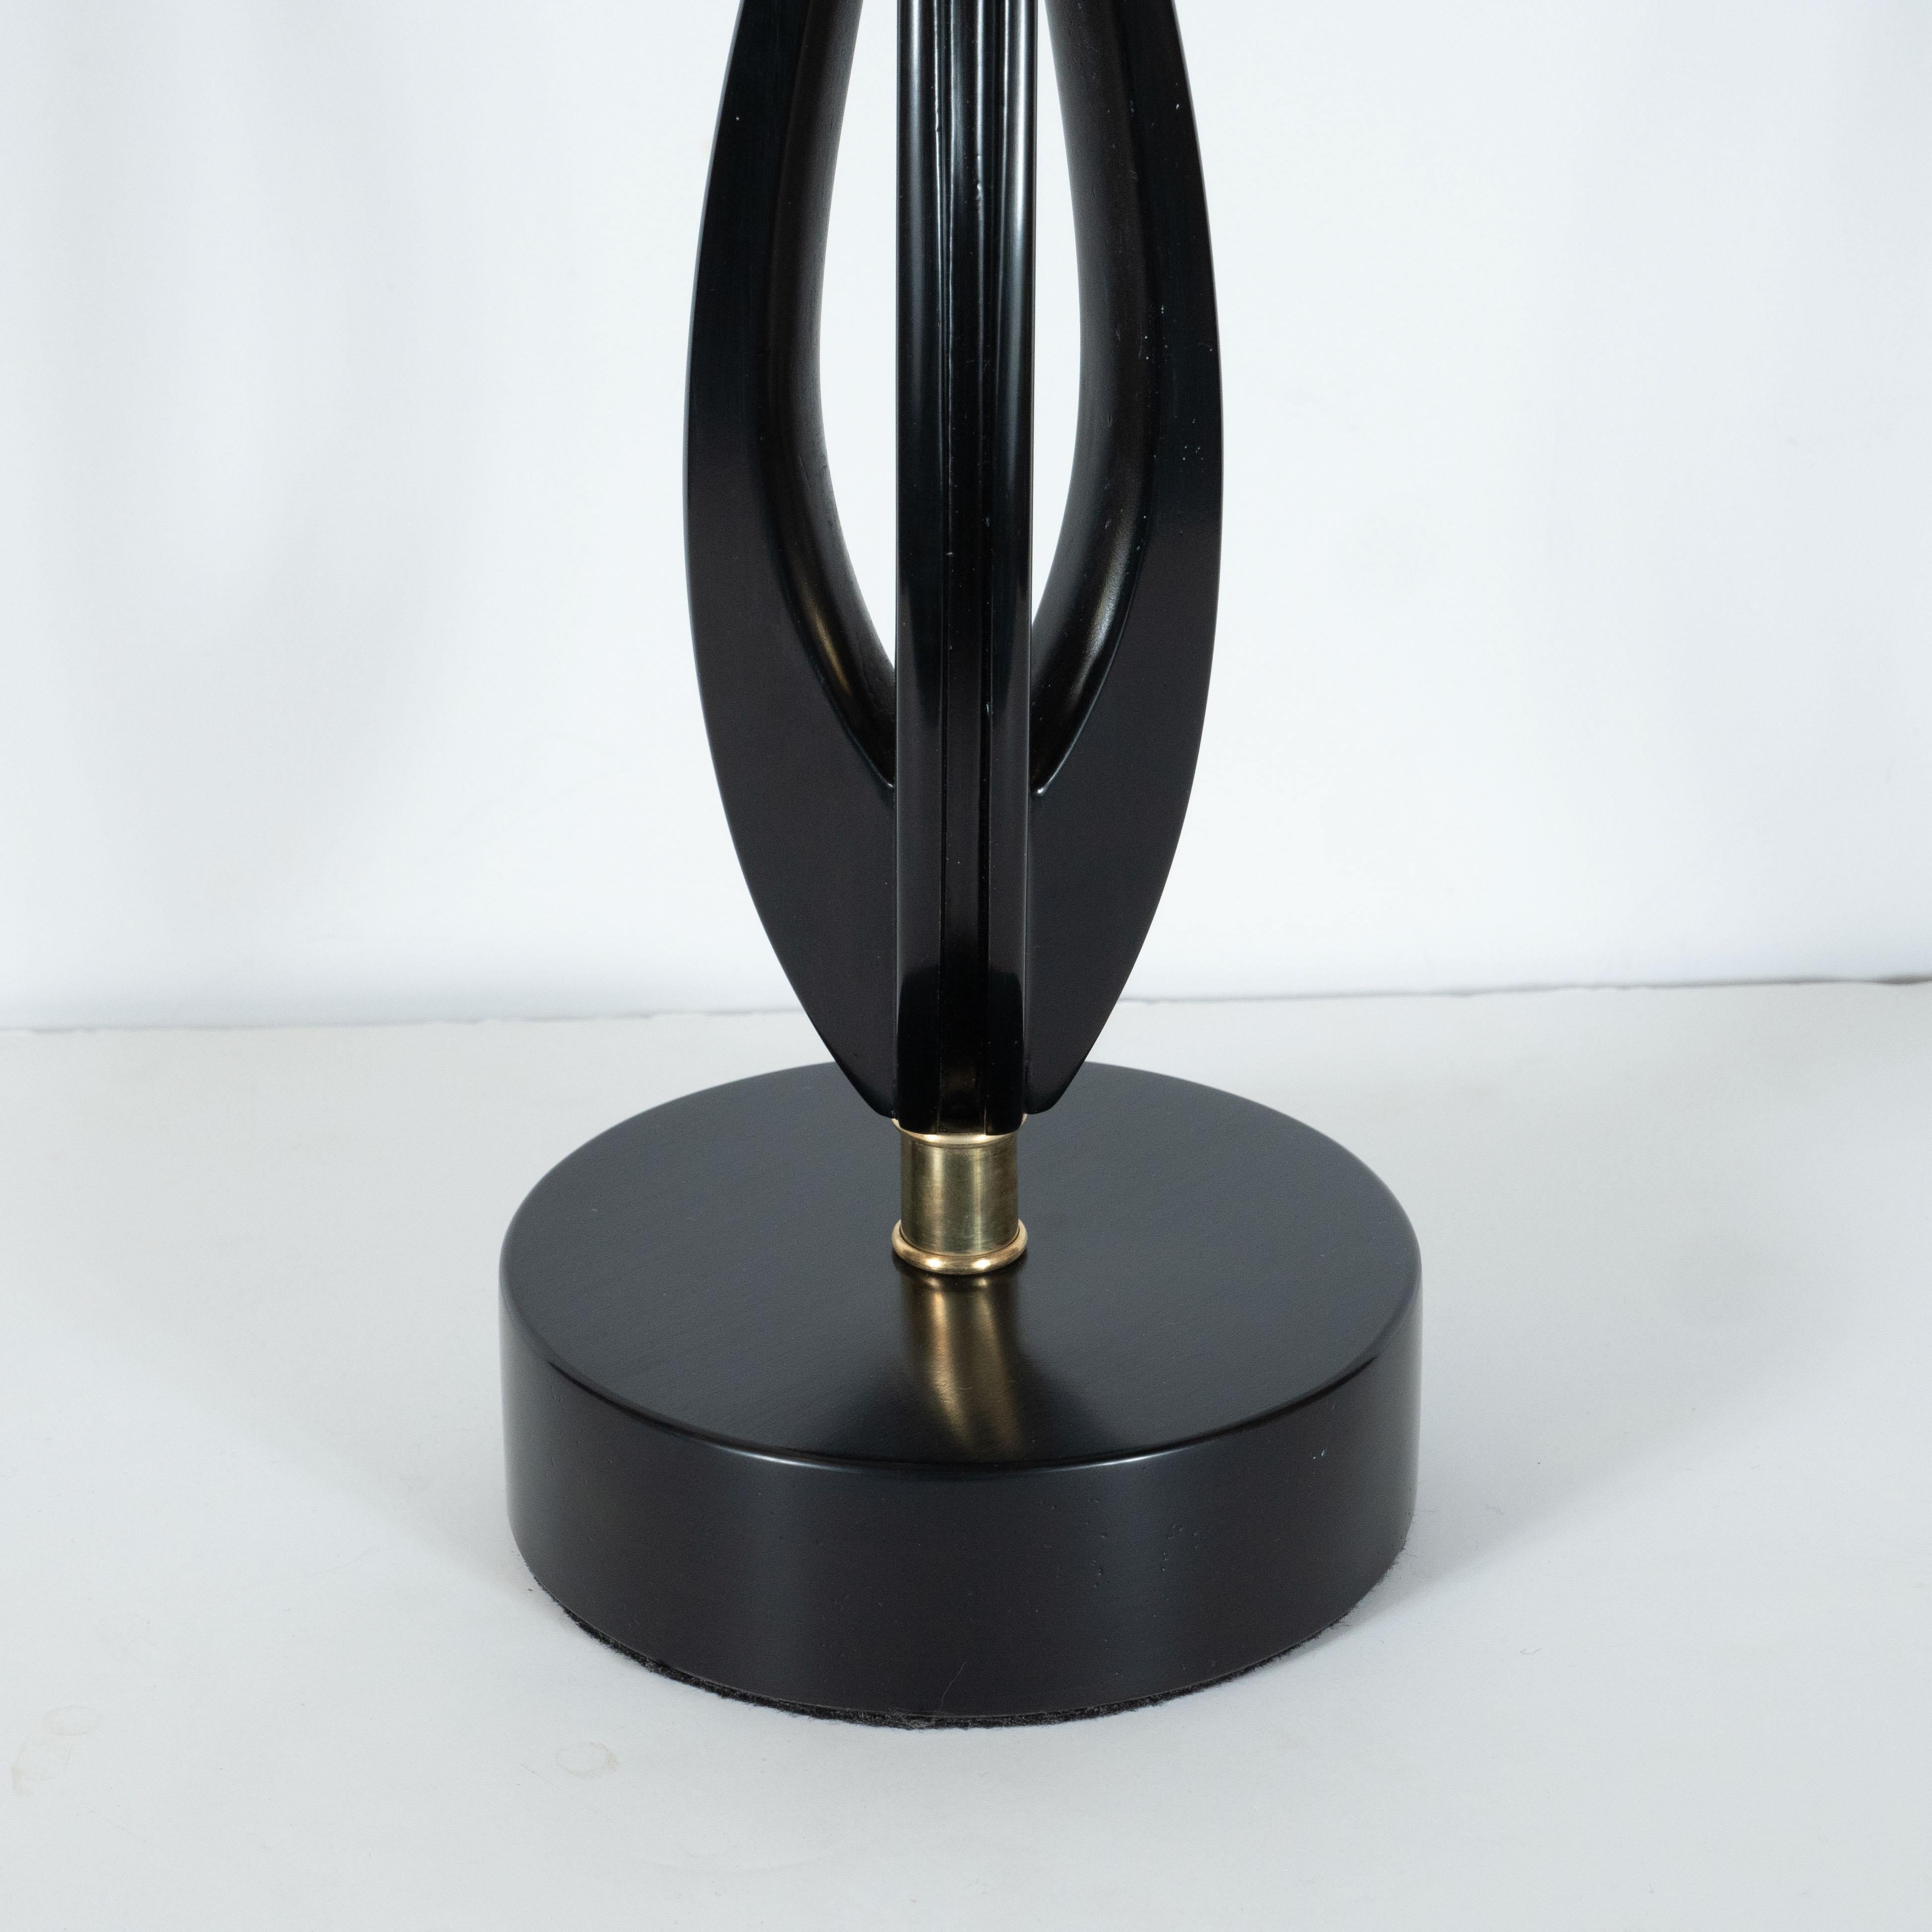 Mid-20th Century Pair of Mid-Century Modern Sculptural Ebonized Walnut and Brass Table Lamps